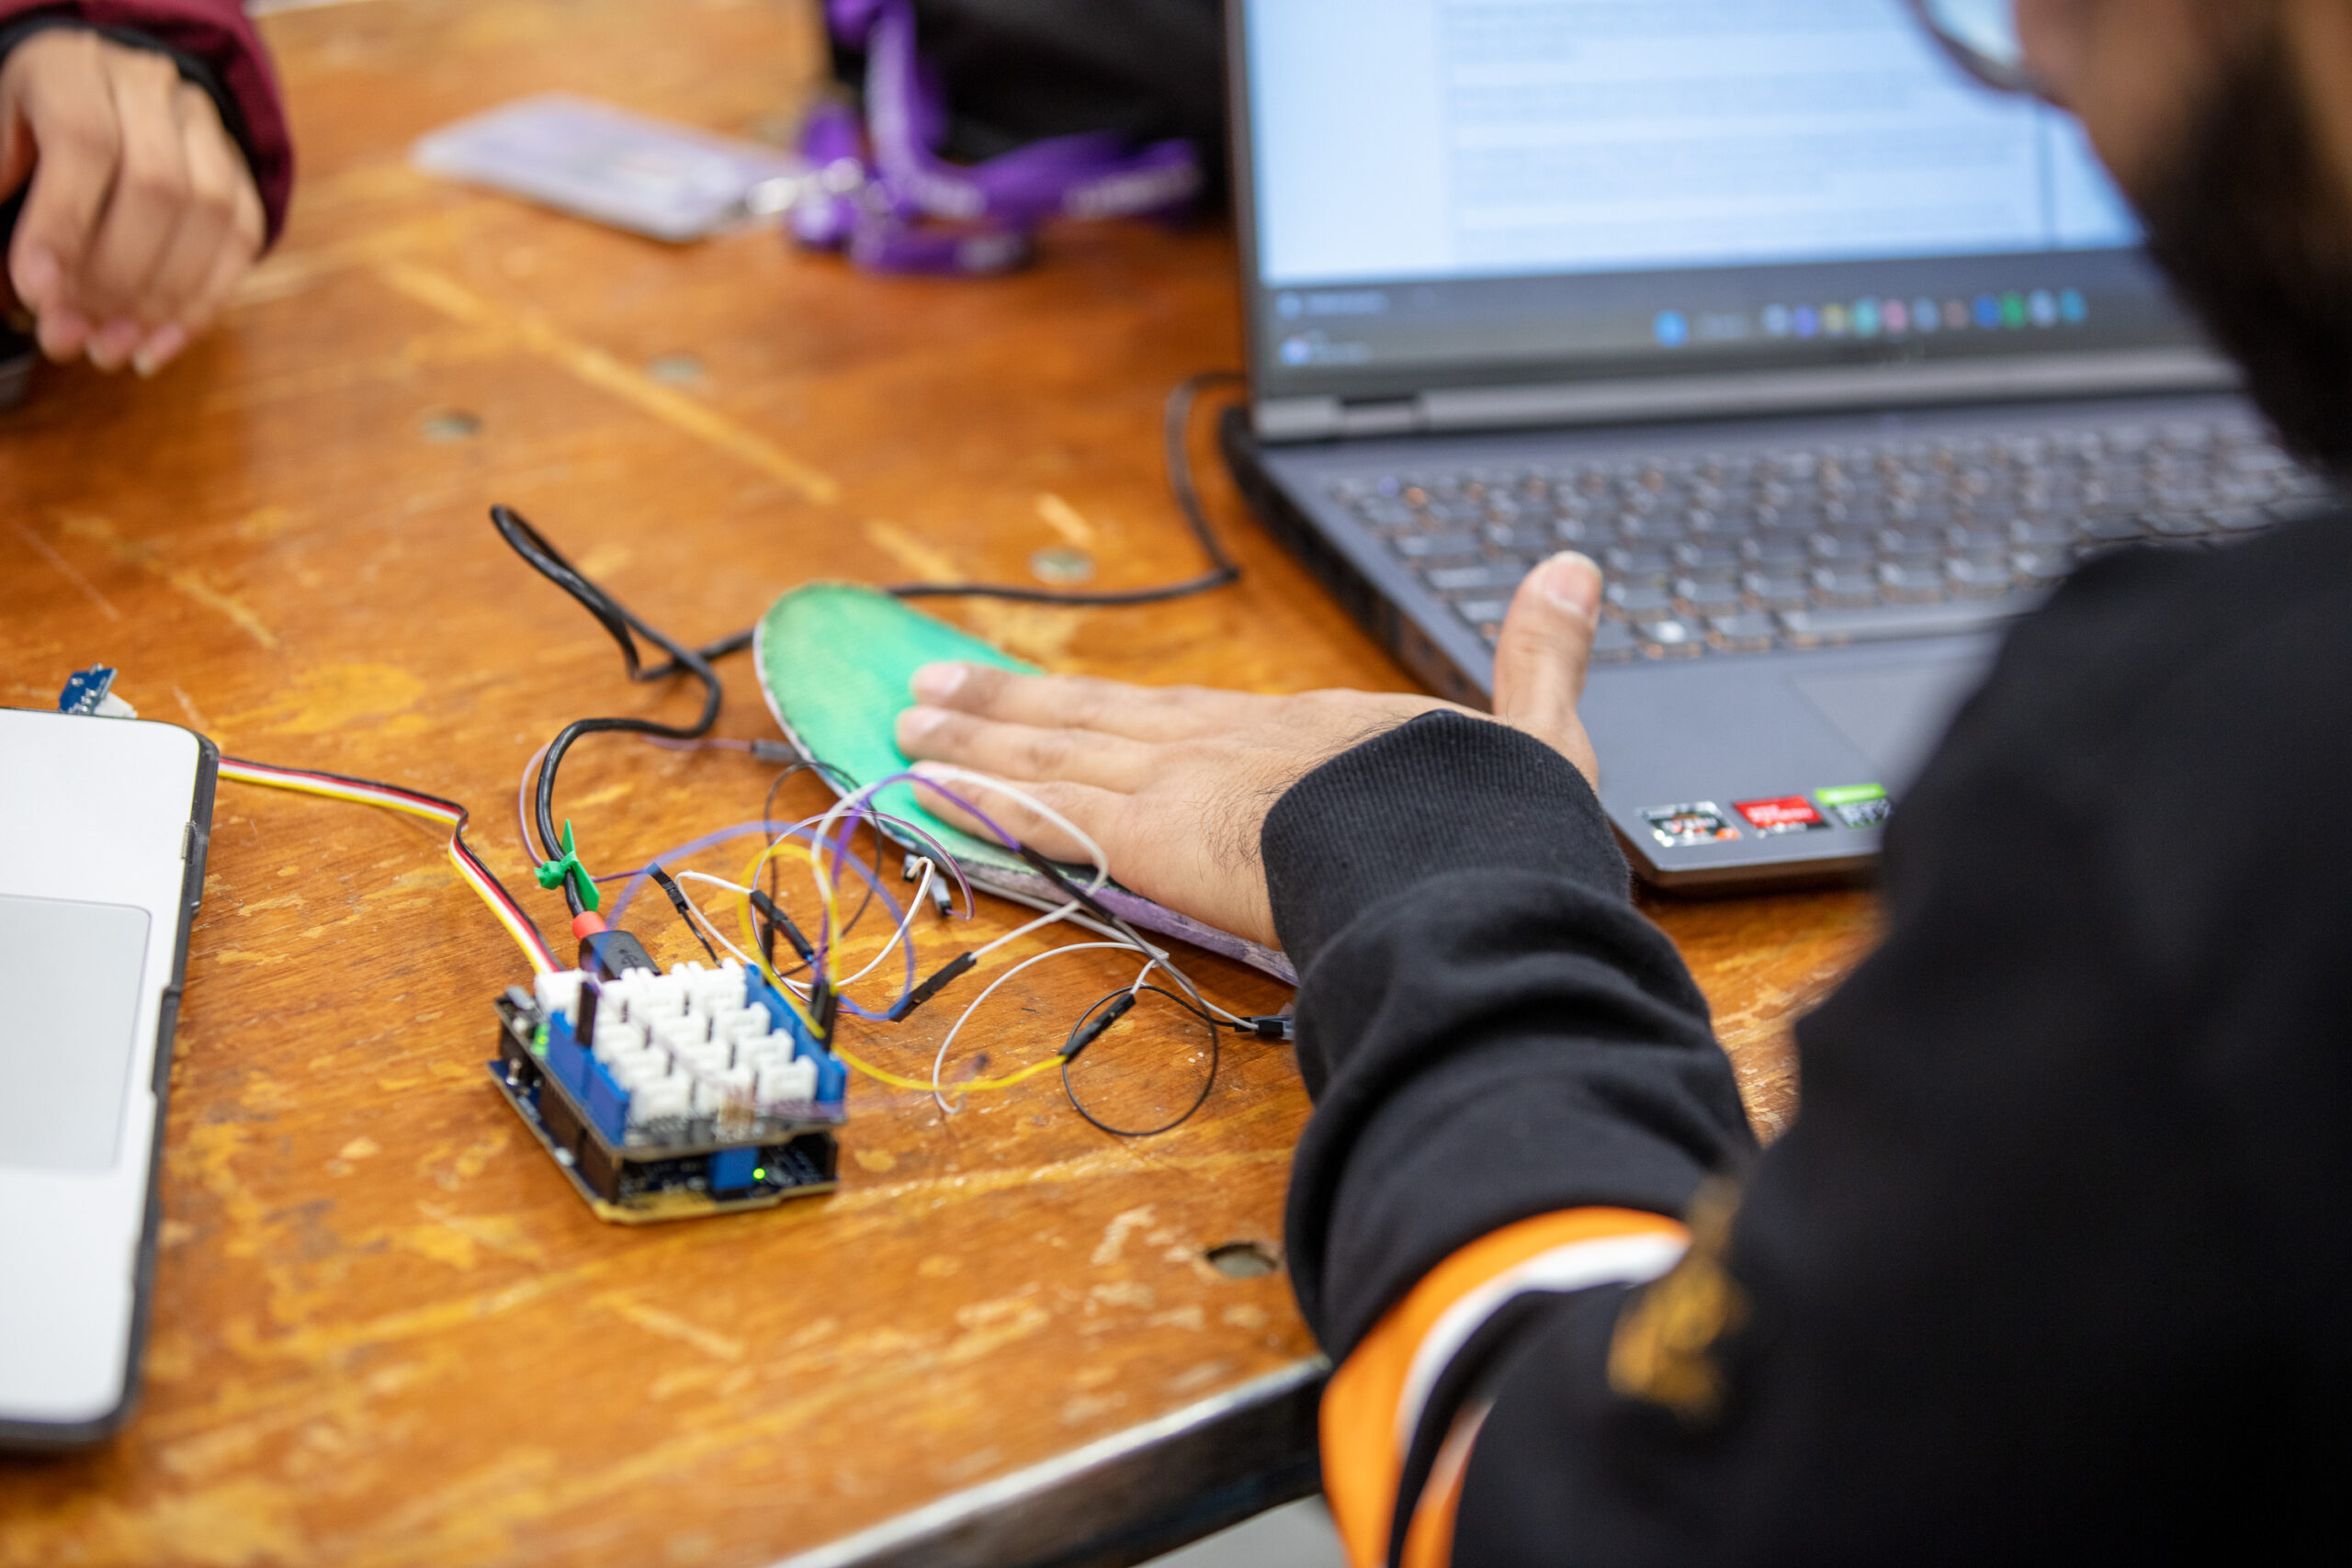 A student testing a handmade device that is connected to their laptop.